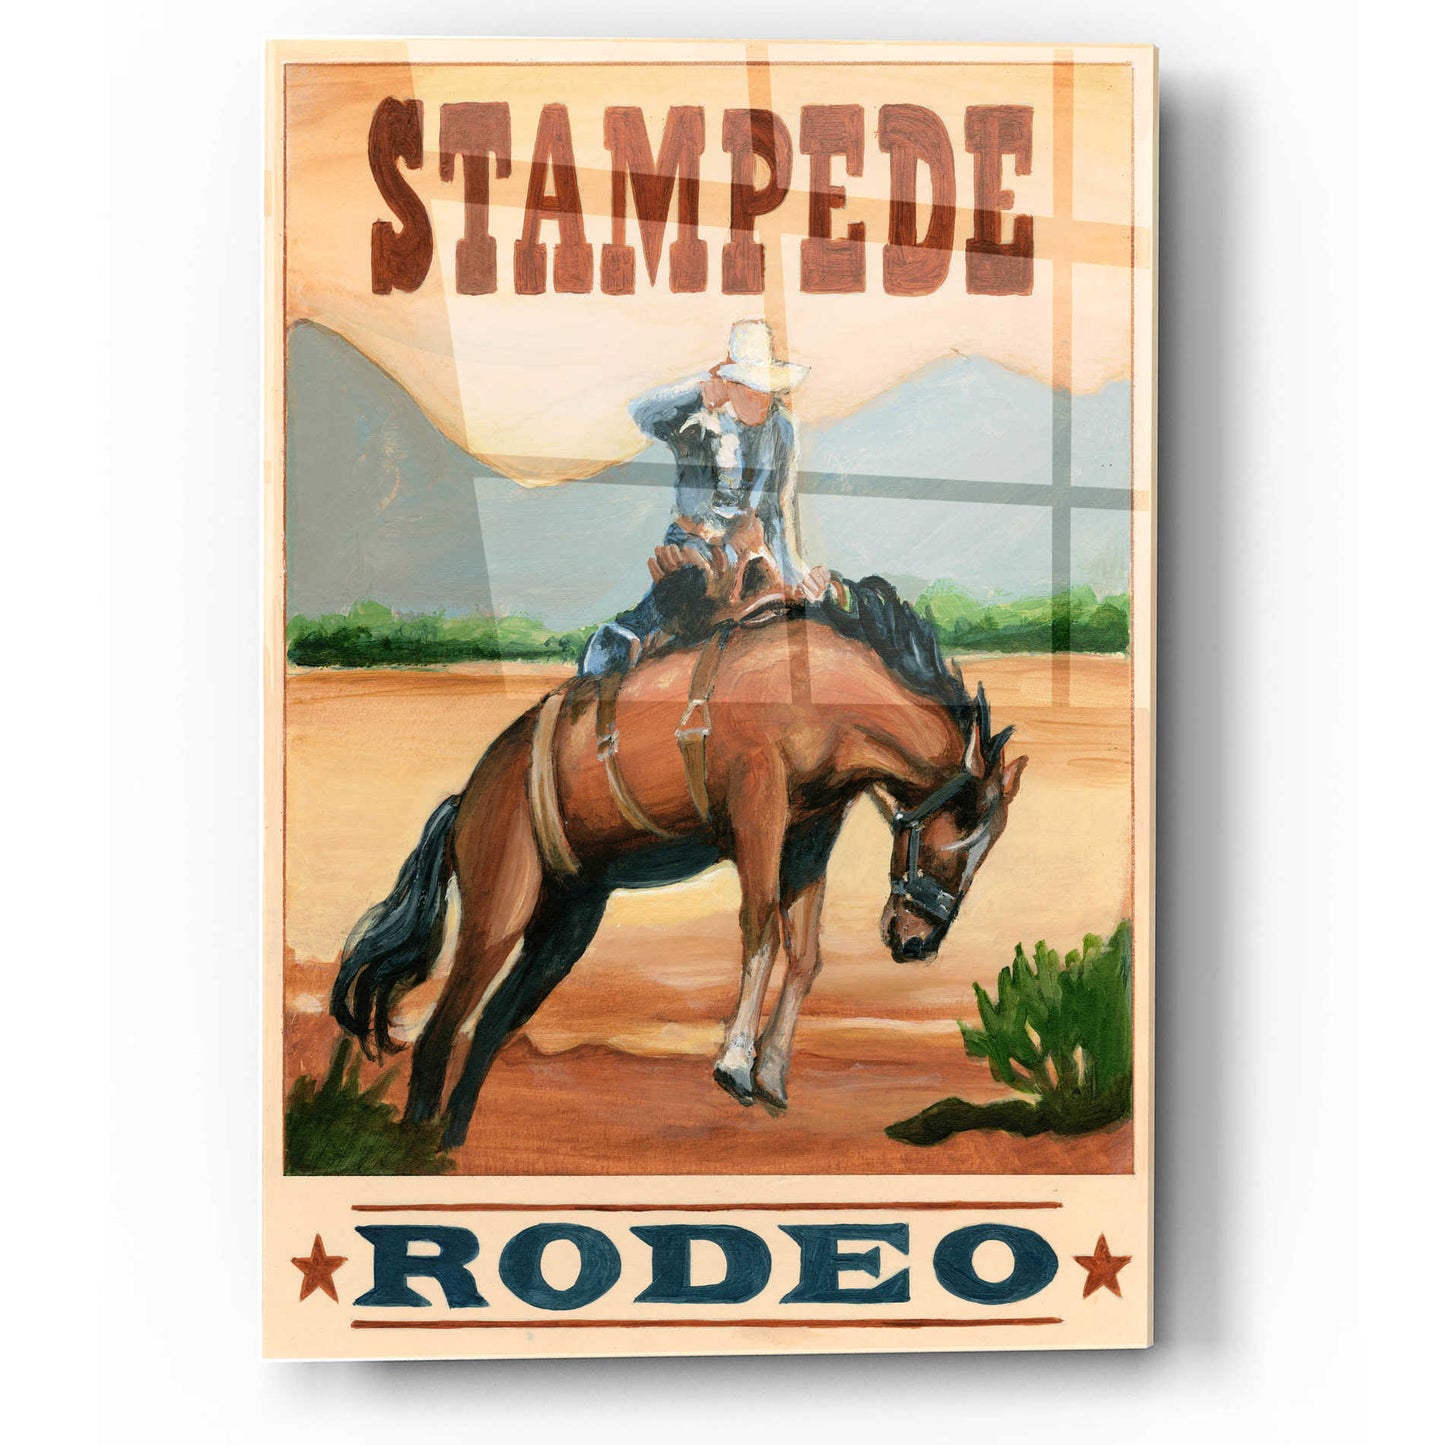 Epic Art 'Stampede Rodeo' by Ethan Harper, Acrylic Glass Wall Art,12x16